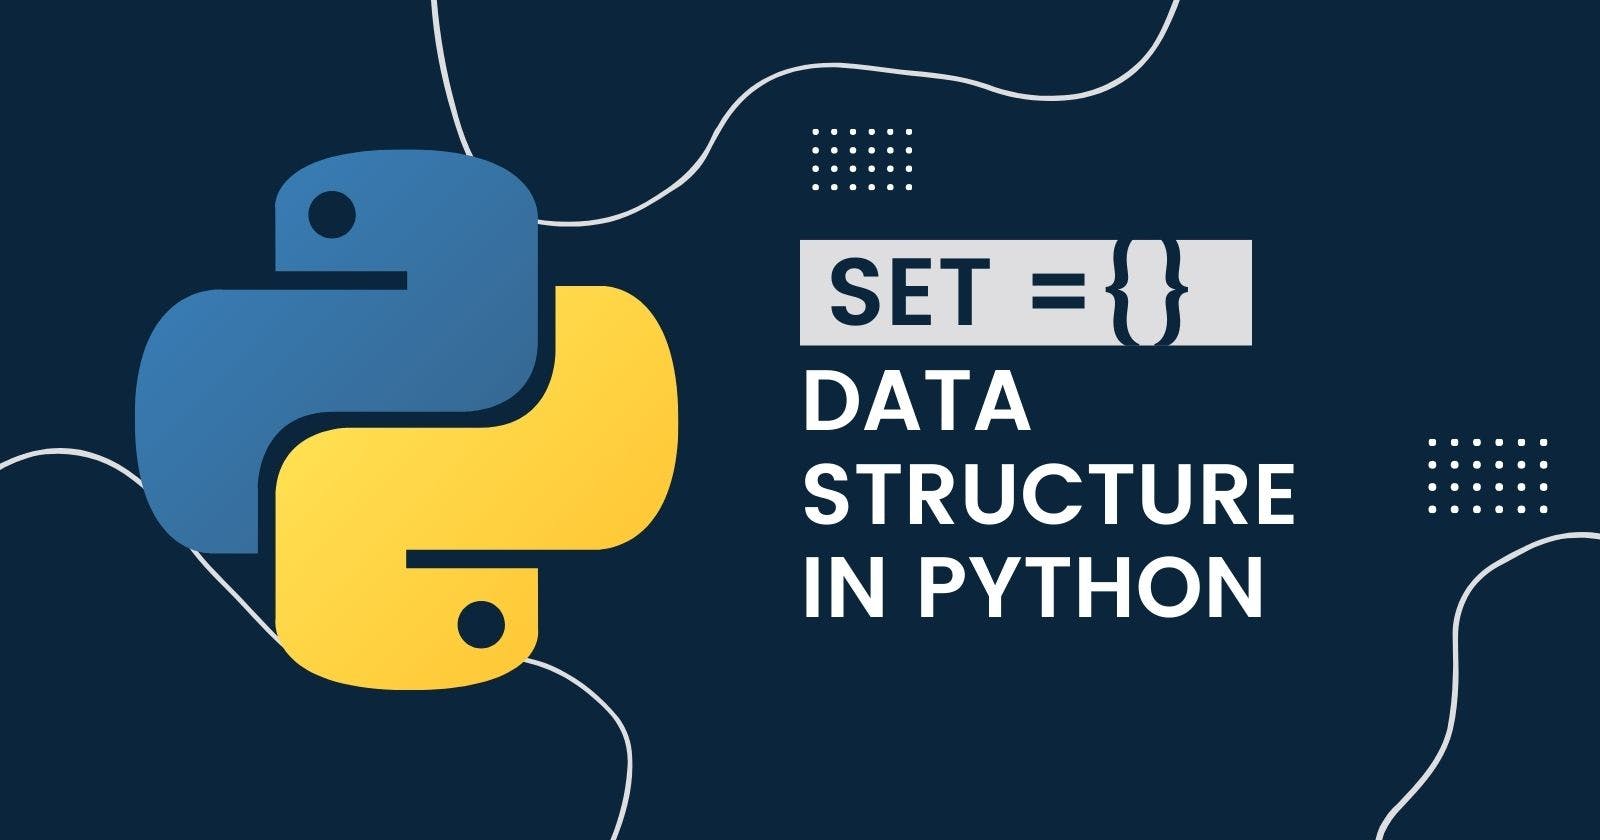 The 'Set'data structure in python